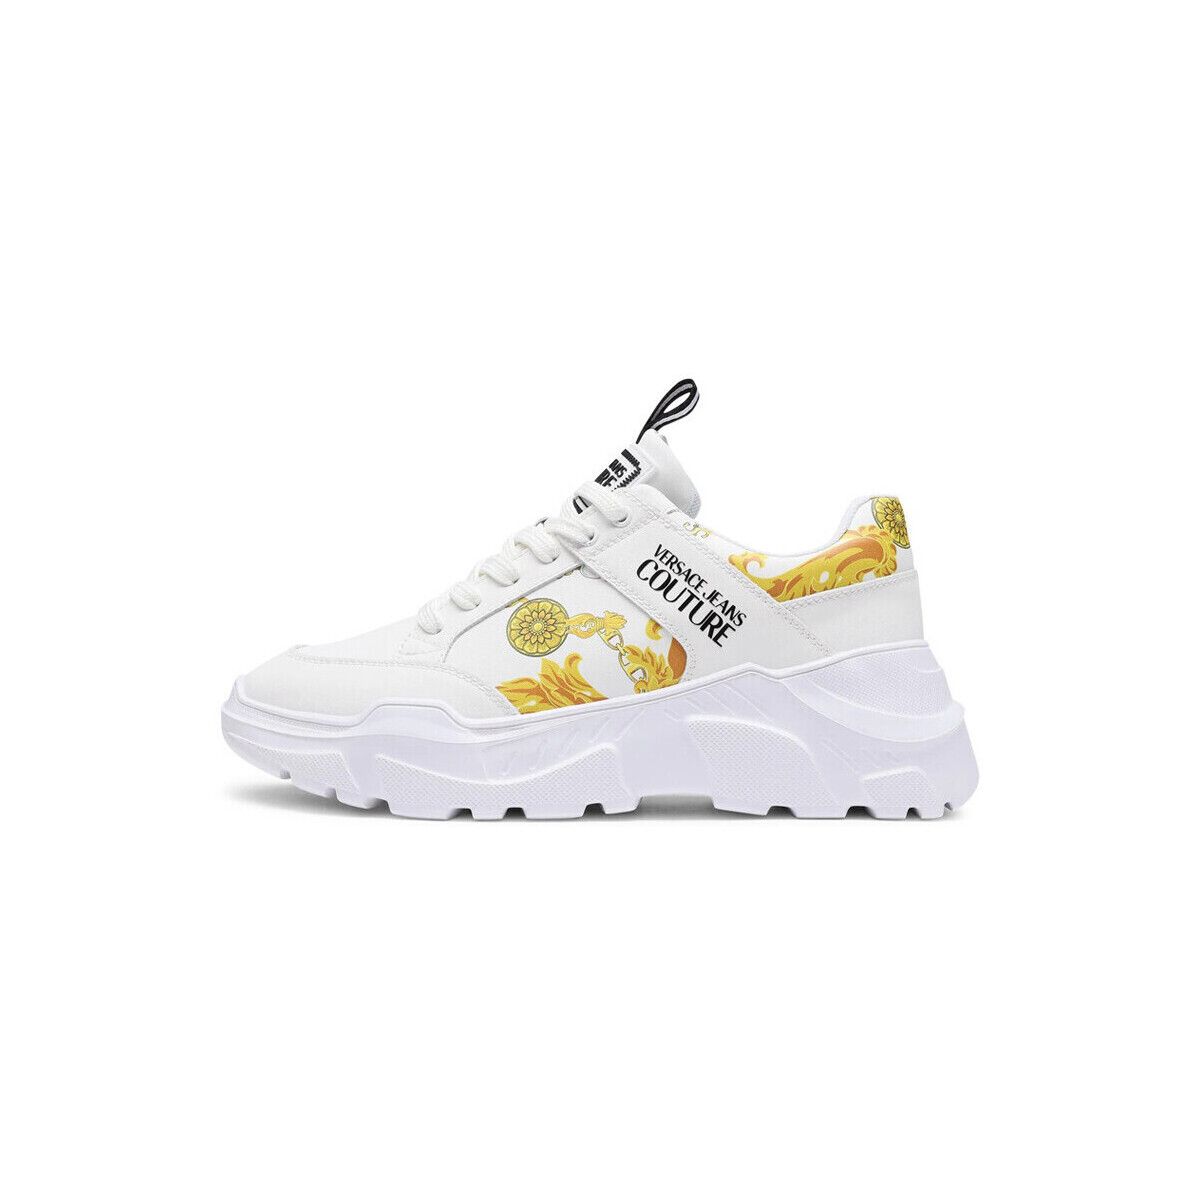 Versace Jeans Couture Blanc Sneakers Blanc q2dYXlso